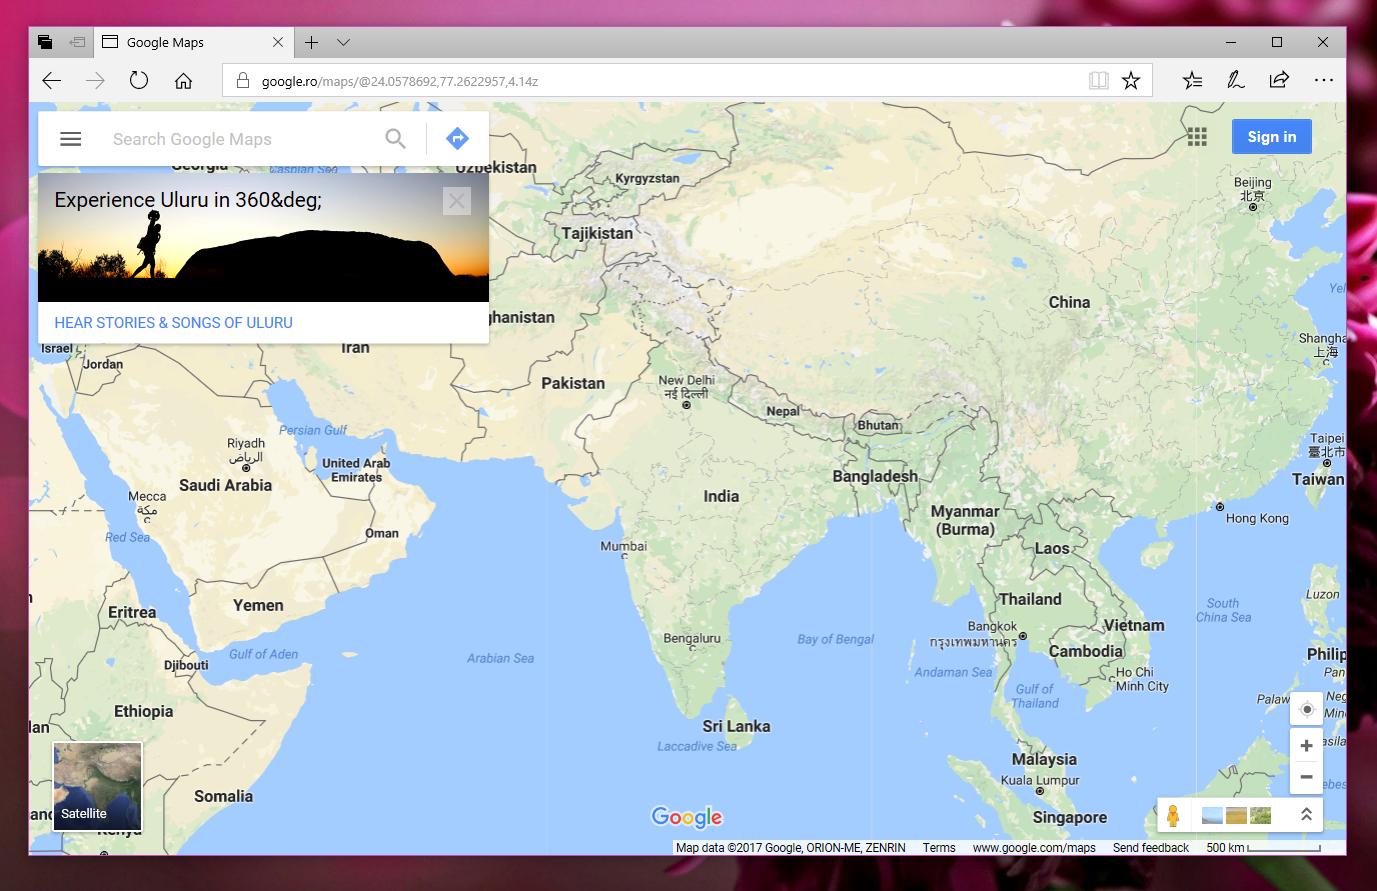 Google Maps Is Unreliable, Indian Government Says